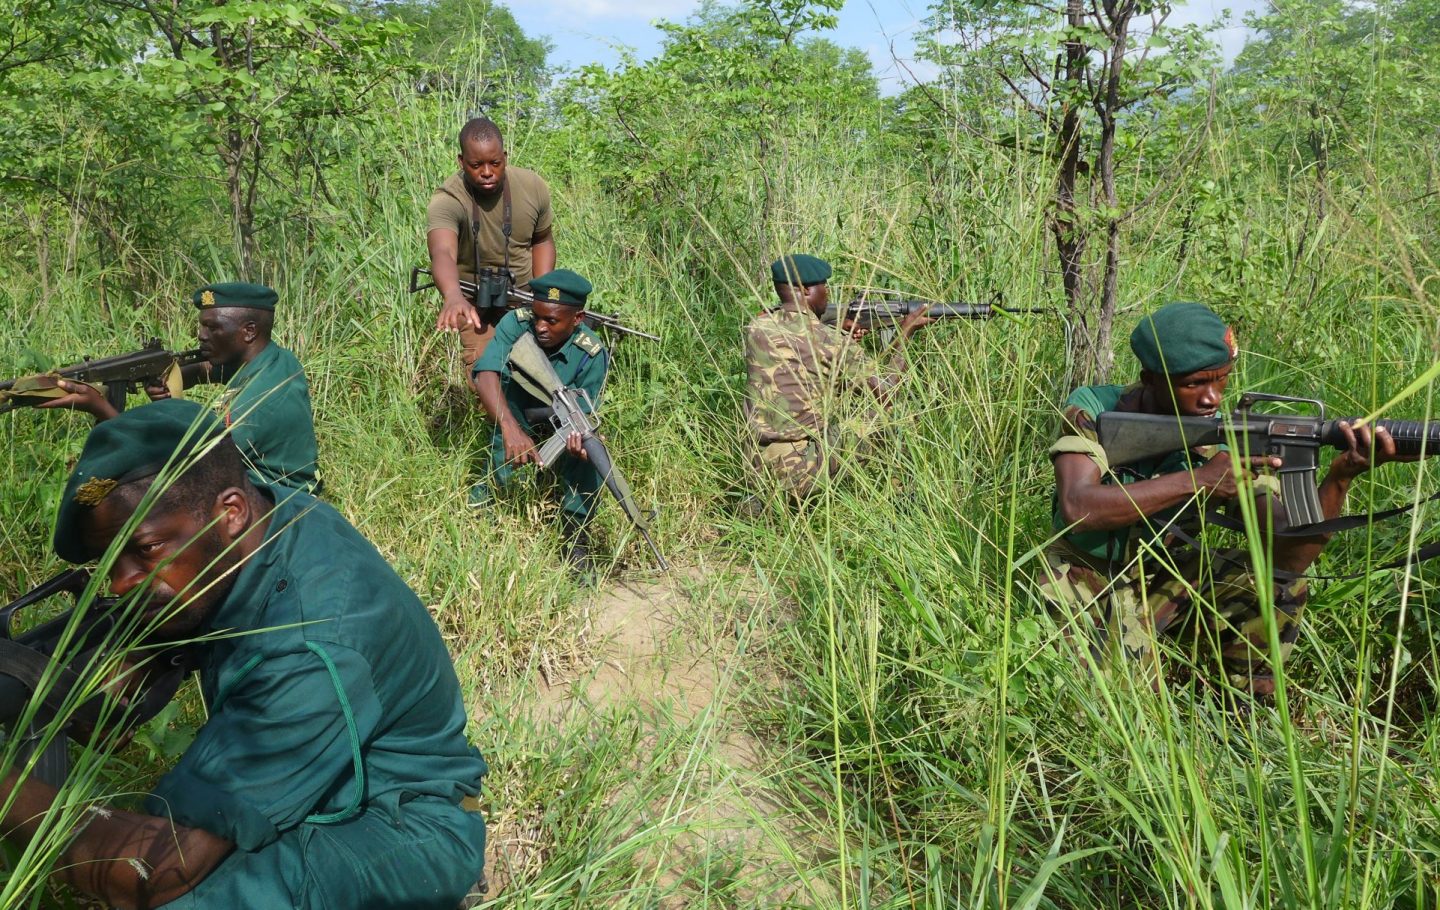 A photograph of 5 men in combat uniform with automatic rifles crouching in tall grass. A sixth man is dressed more informally and explaining something to one of the men.